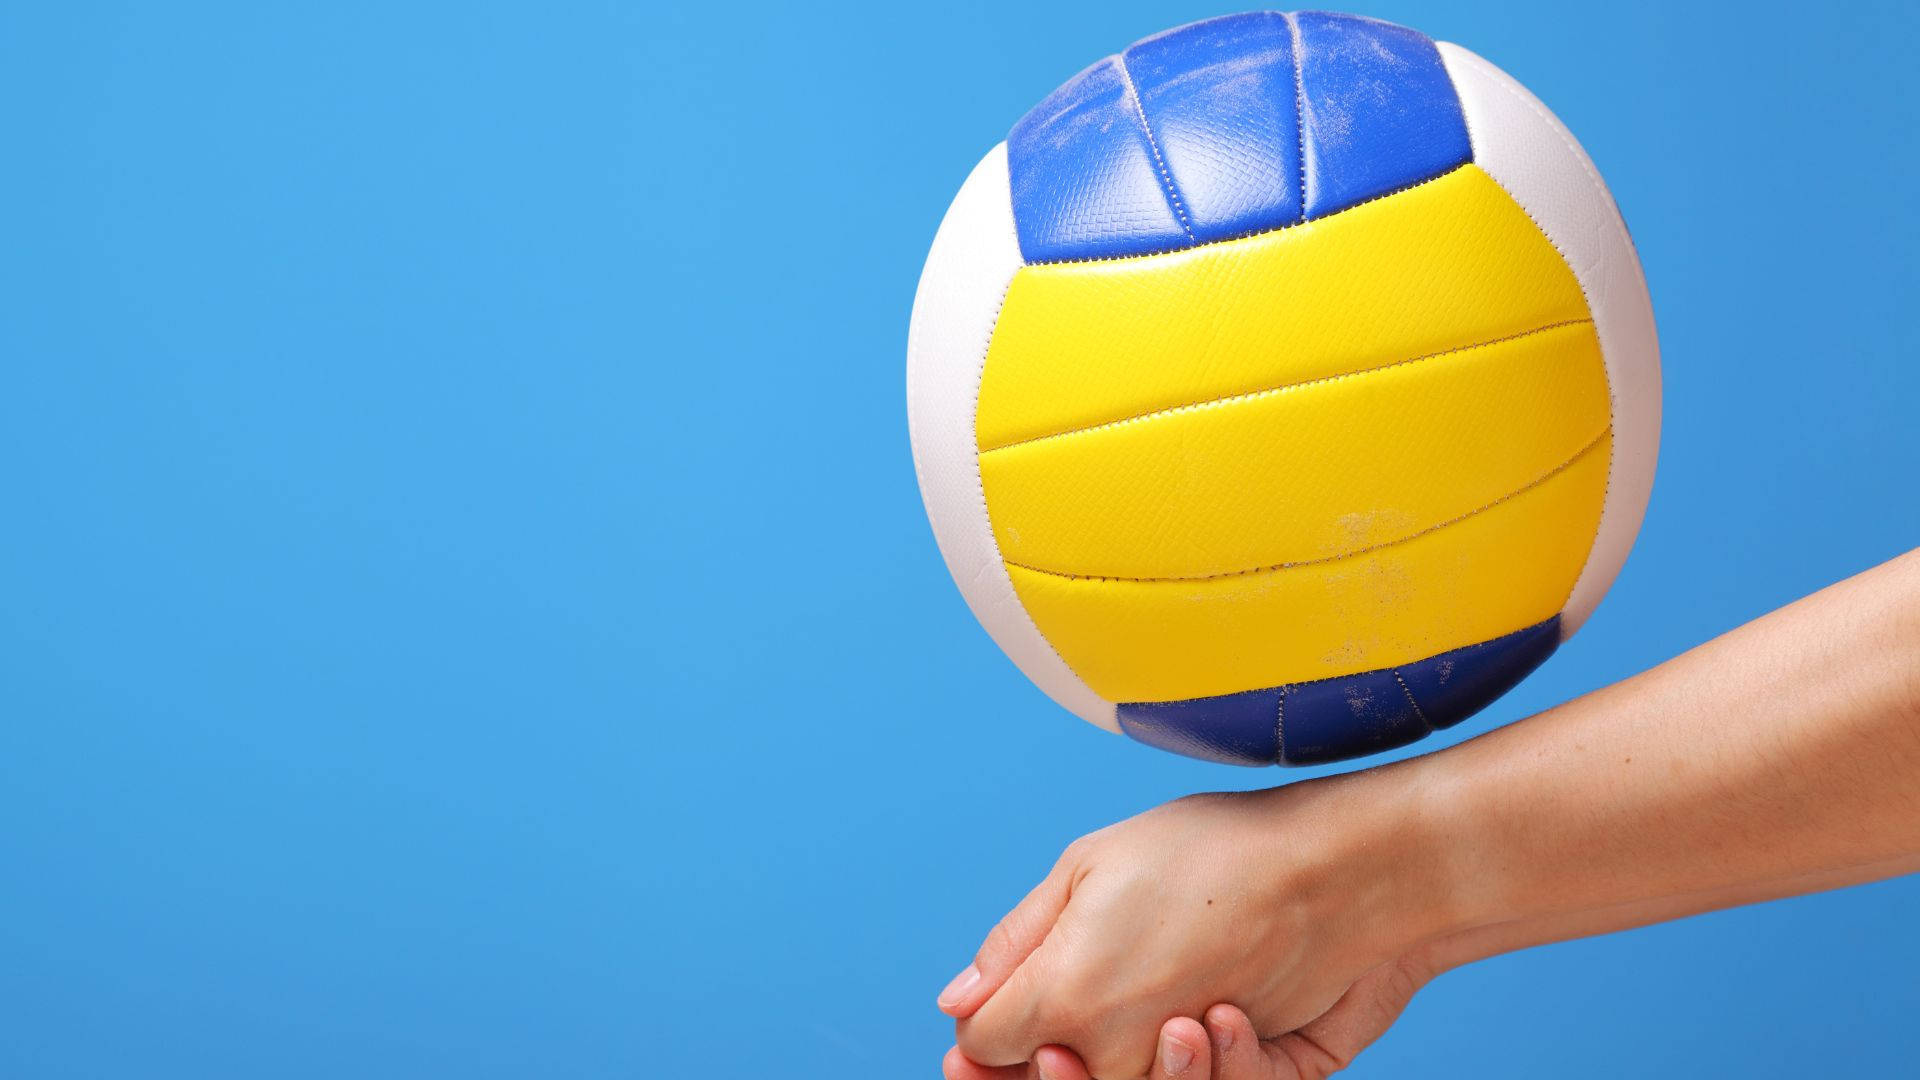 "Come hit the sand and get volleyball ready!" Wallpaper